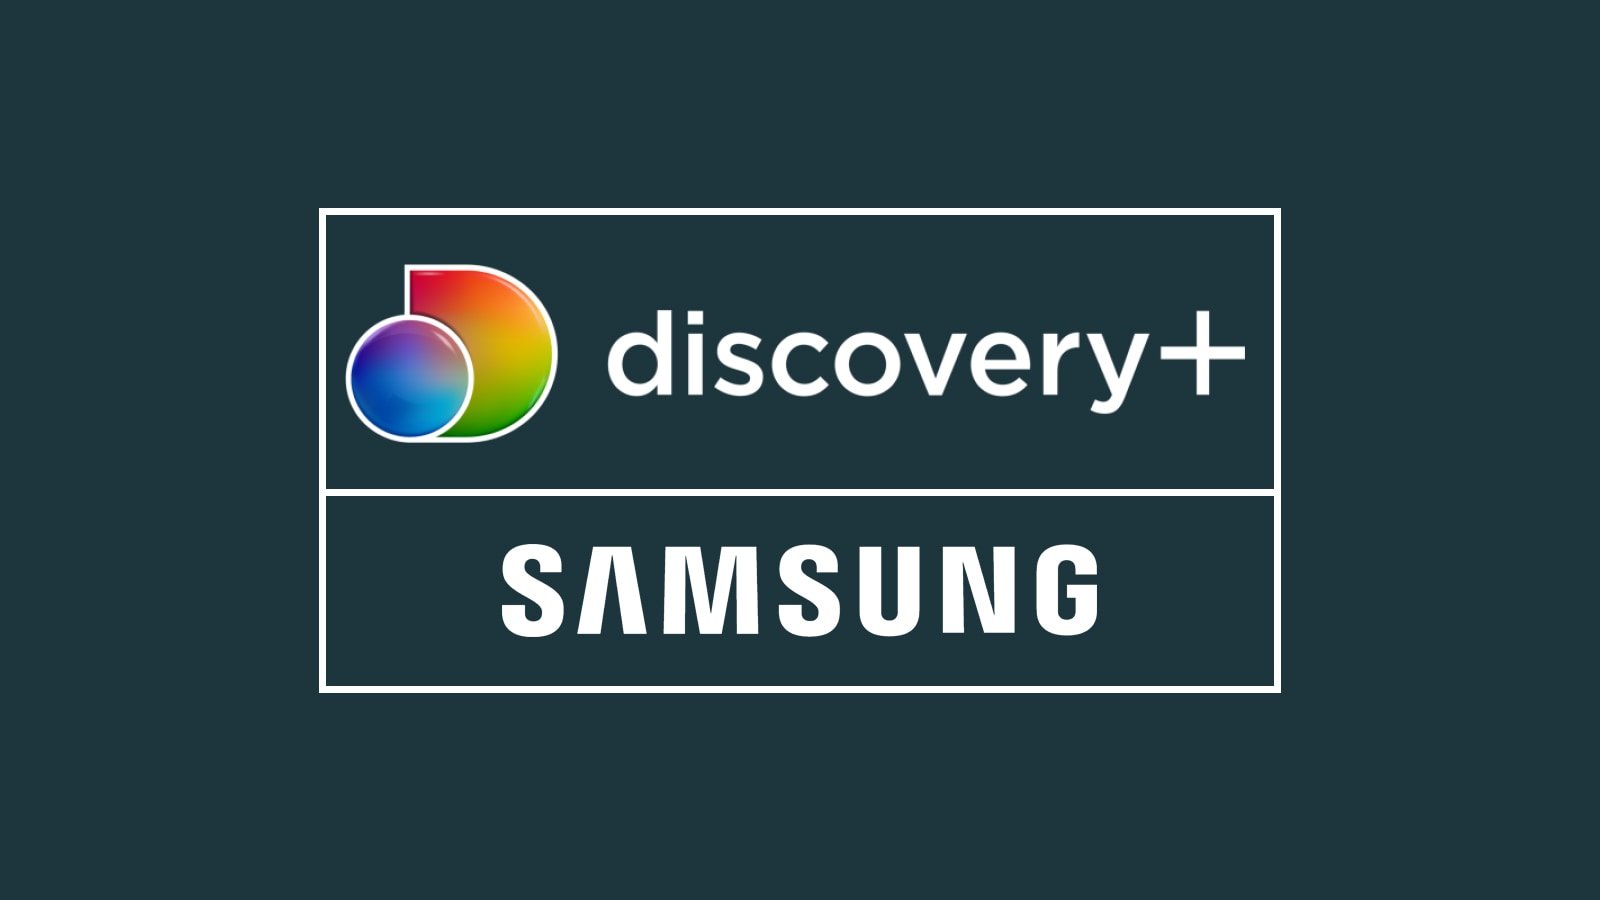 How to Get Discovery Plus on Samsung TV?